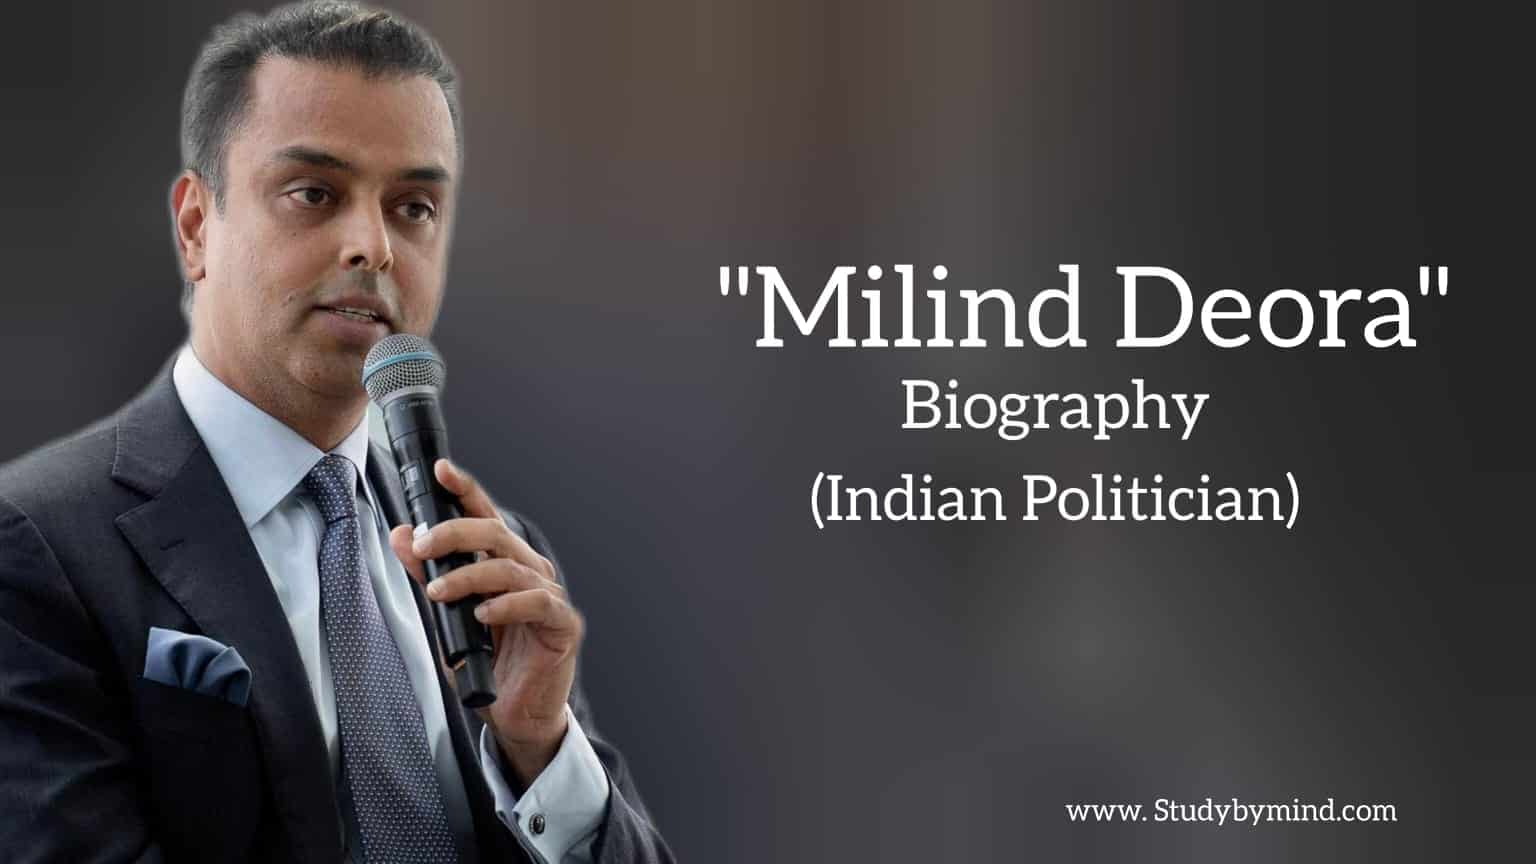 You are currently viewing Milind deora biography in english (Indian politician)